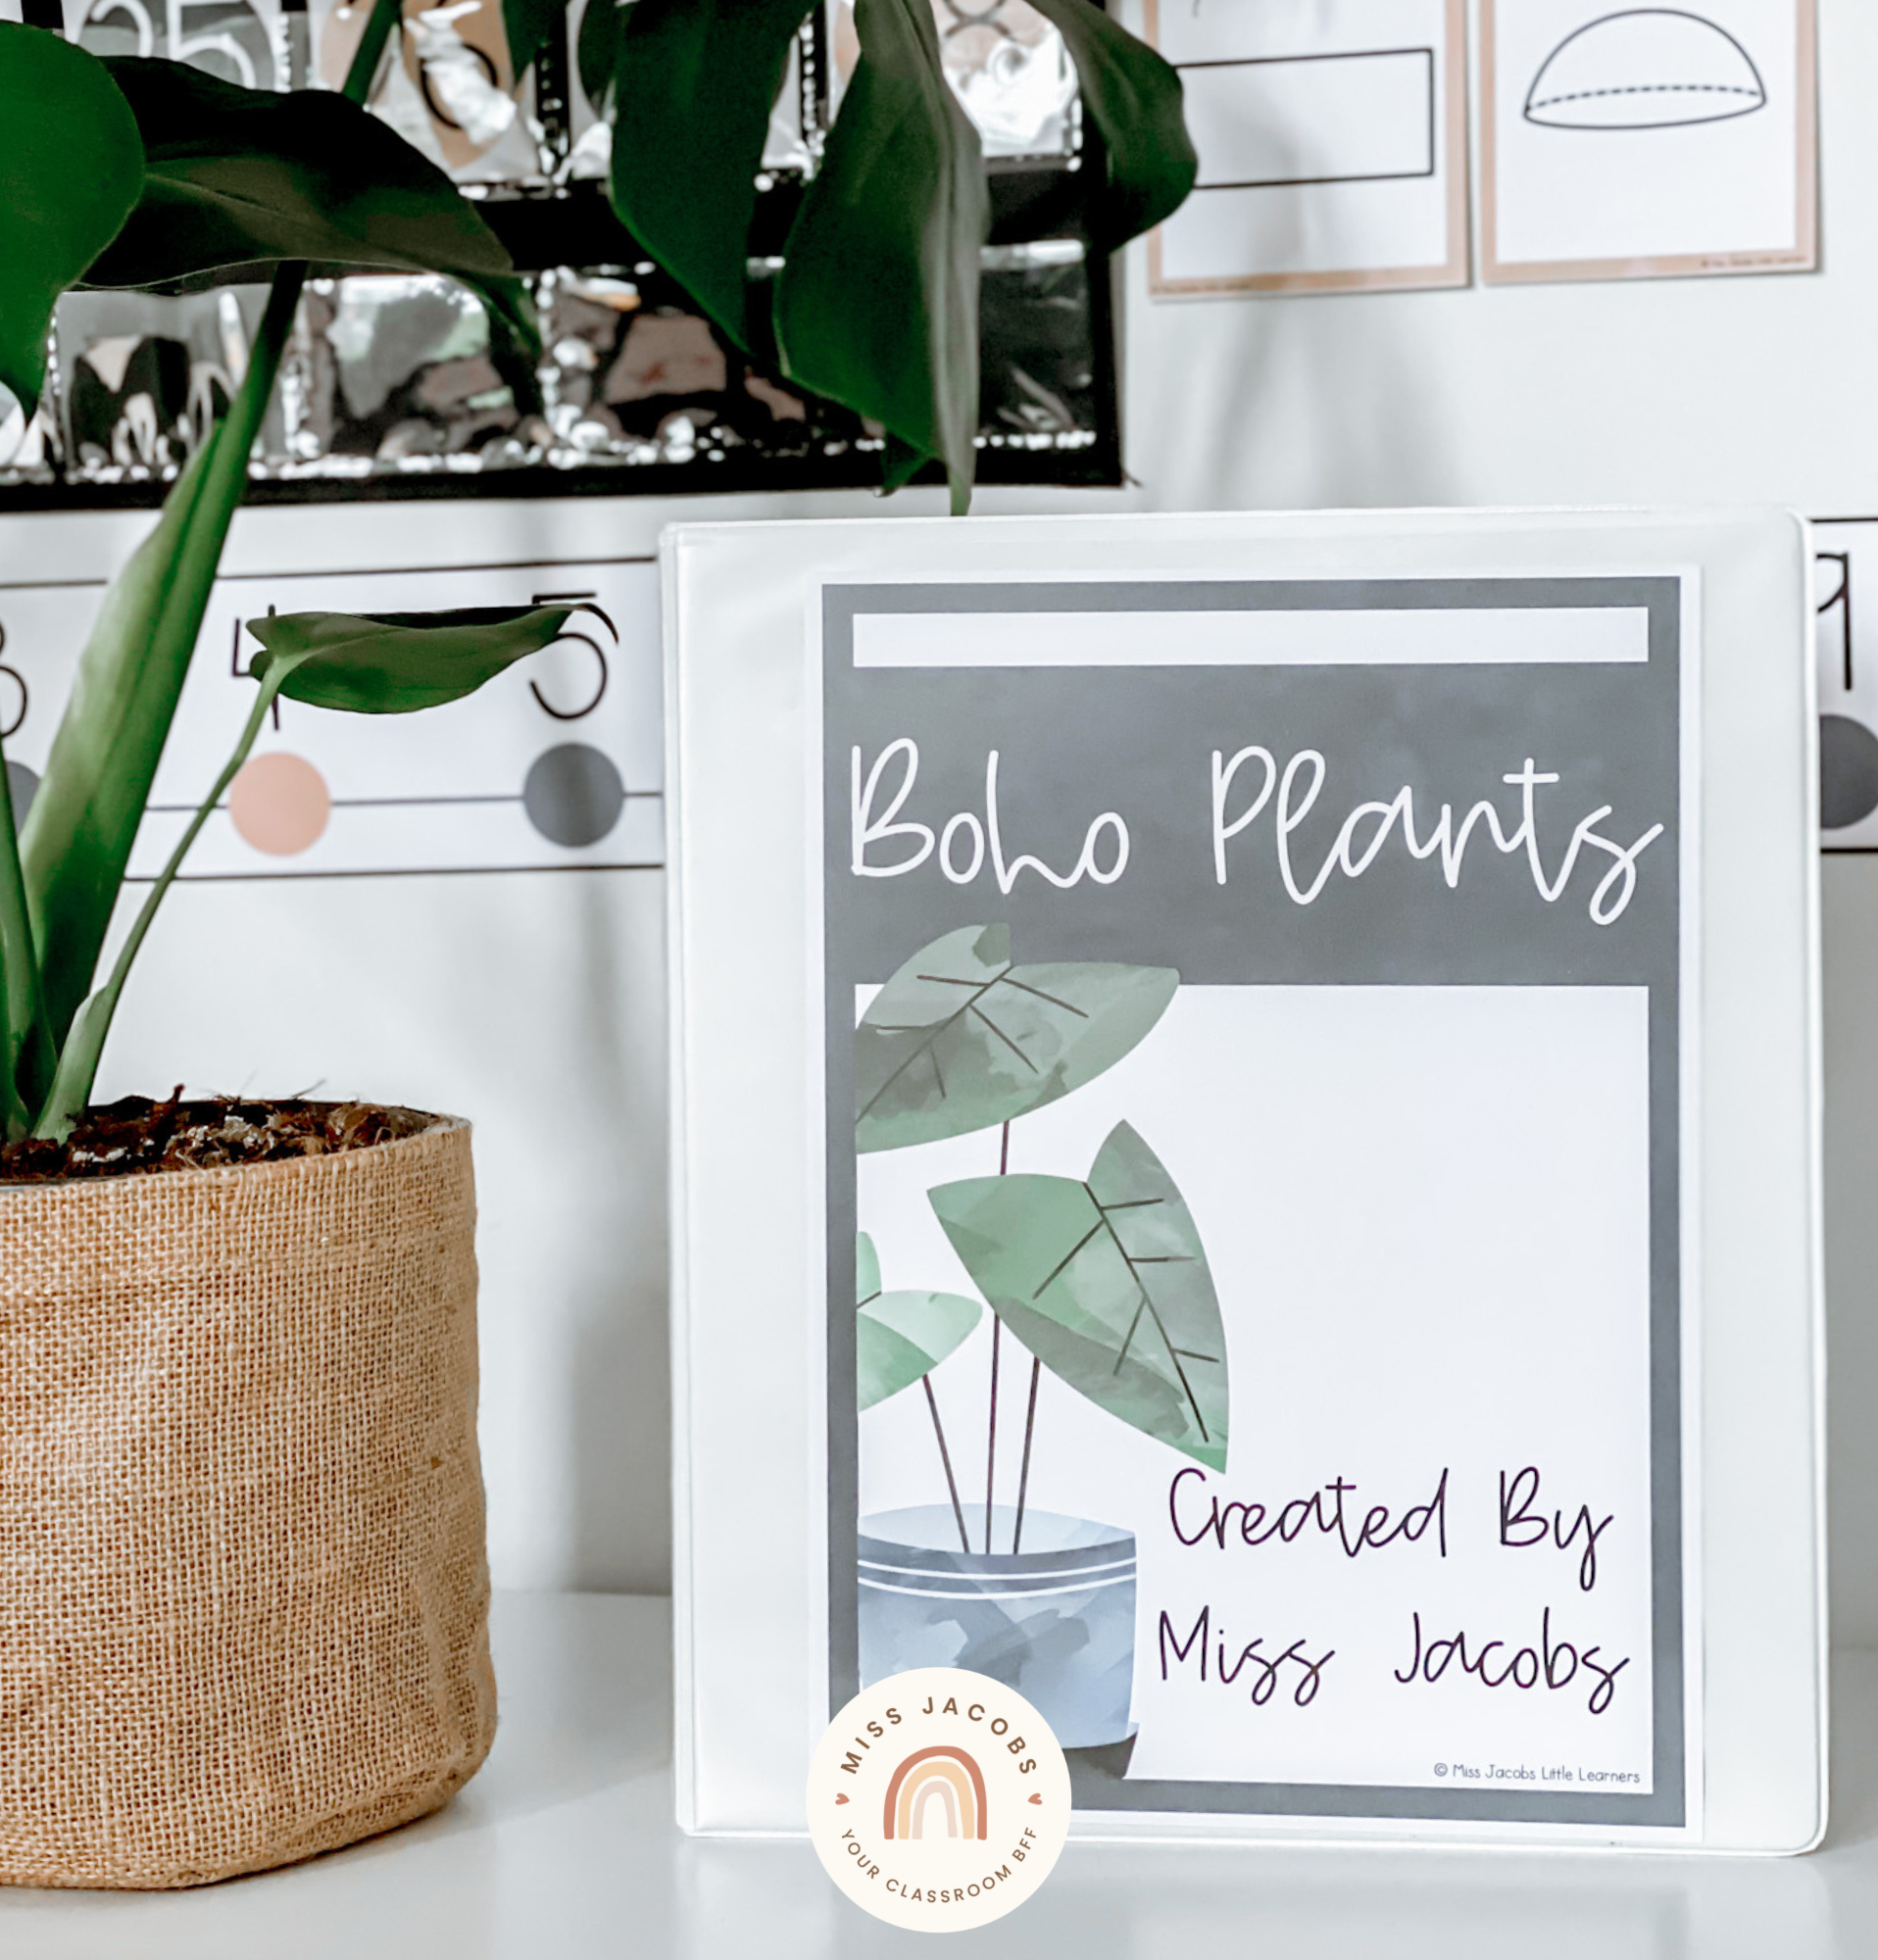 There are two images. In the first we see the top corner of a bookshelf, and inside are a series of the white binder with the Boho Plants labels. There’s an illustration of a plant on the base and handwriting font spelling out the months of the year. Next to the shelf is a trolley with drawers that also contain the Boho Plants labels. There are large plant illustrations that span across a number of the labels, which also feature the days of the week in cursive font. The right-hand image shows a closeup of a binder cover, it says ‘boho plants’ and features an illustrated pot plant with a blue pot and big dark green leaves. The heading is white handwriting font against a black background.